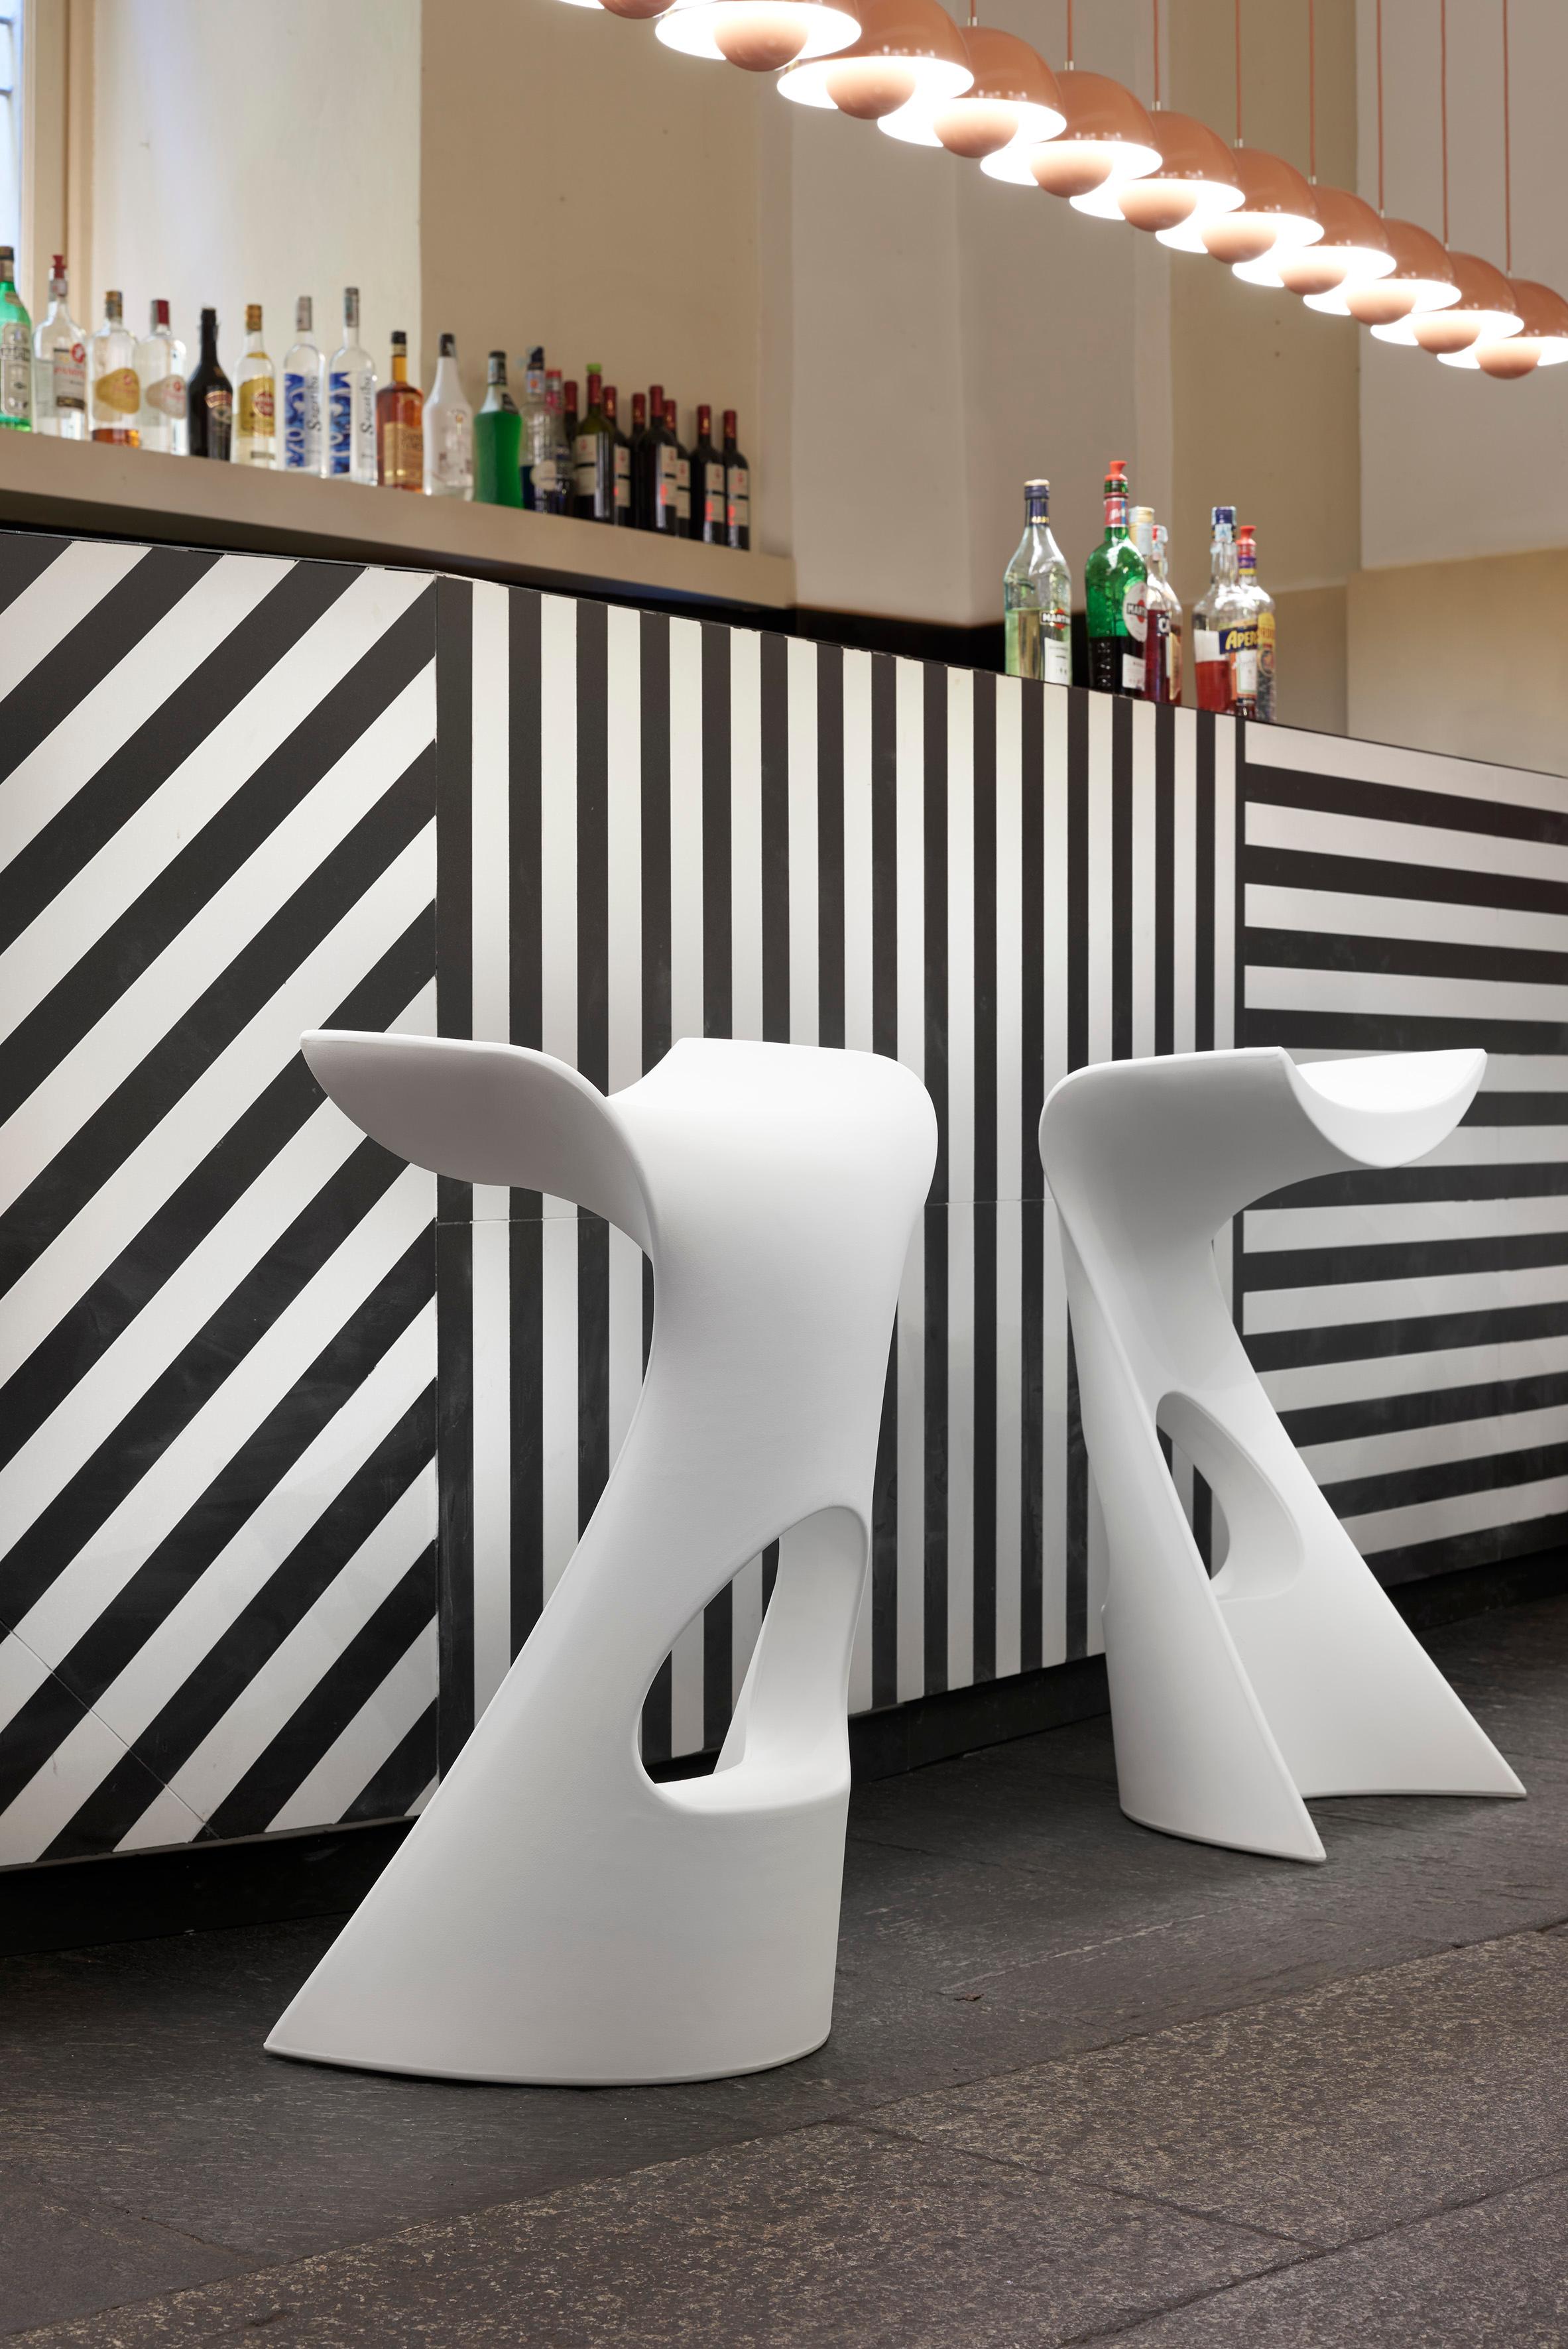 Milky White Koncord High Stool by Karim Rashid
Dimensions: D 40 x W 43 x H 76 cm.
Materials: Polyethylene.
Weight: 5 kg.

Available in different color options. Available in standard, glossy or matte lacquered finishes. Also available in a